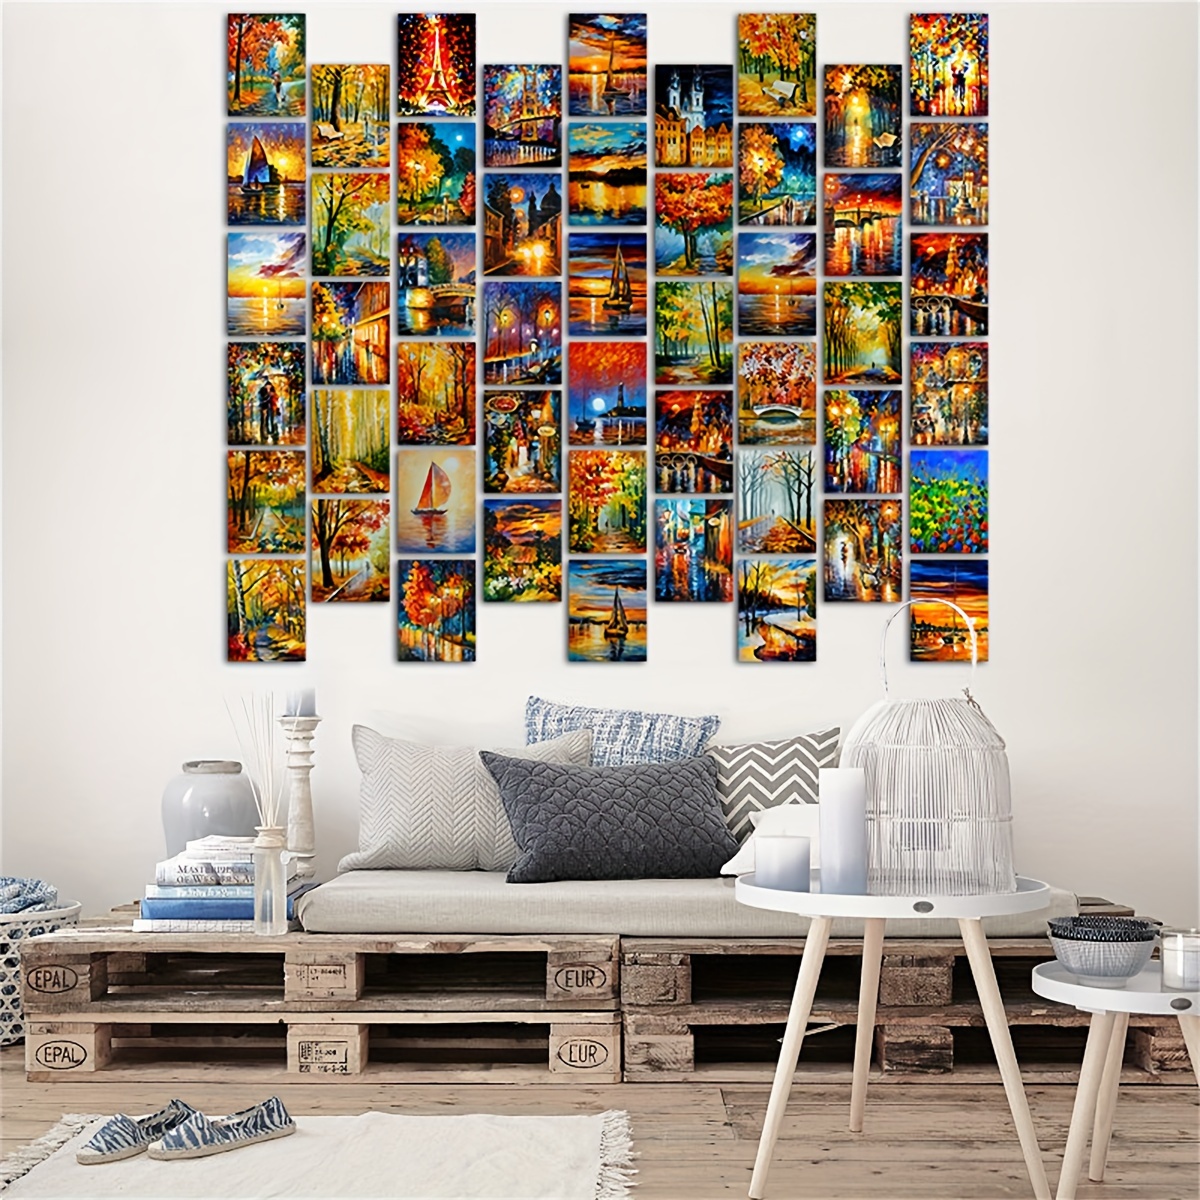 Wall Collage Kit Vintage 50Pcs Aesthetic Room Posters Bedroom Decor for  Teen Girls 50 photo collages ,Dorm Wall Decor, Teen Room Decor 